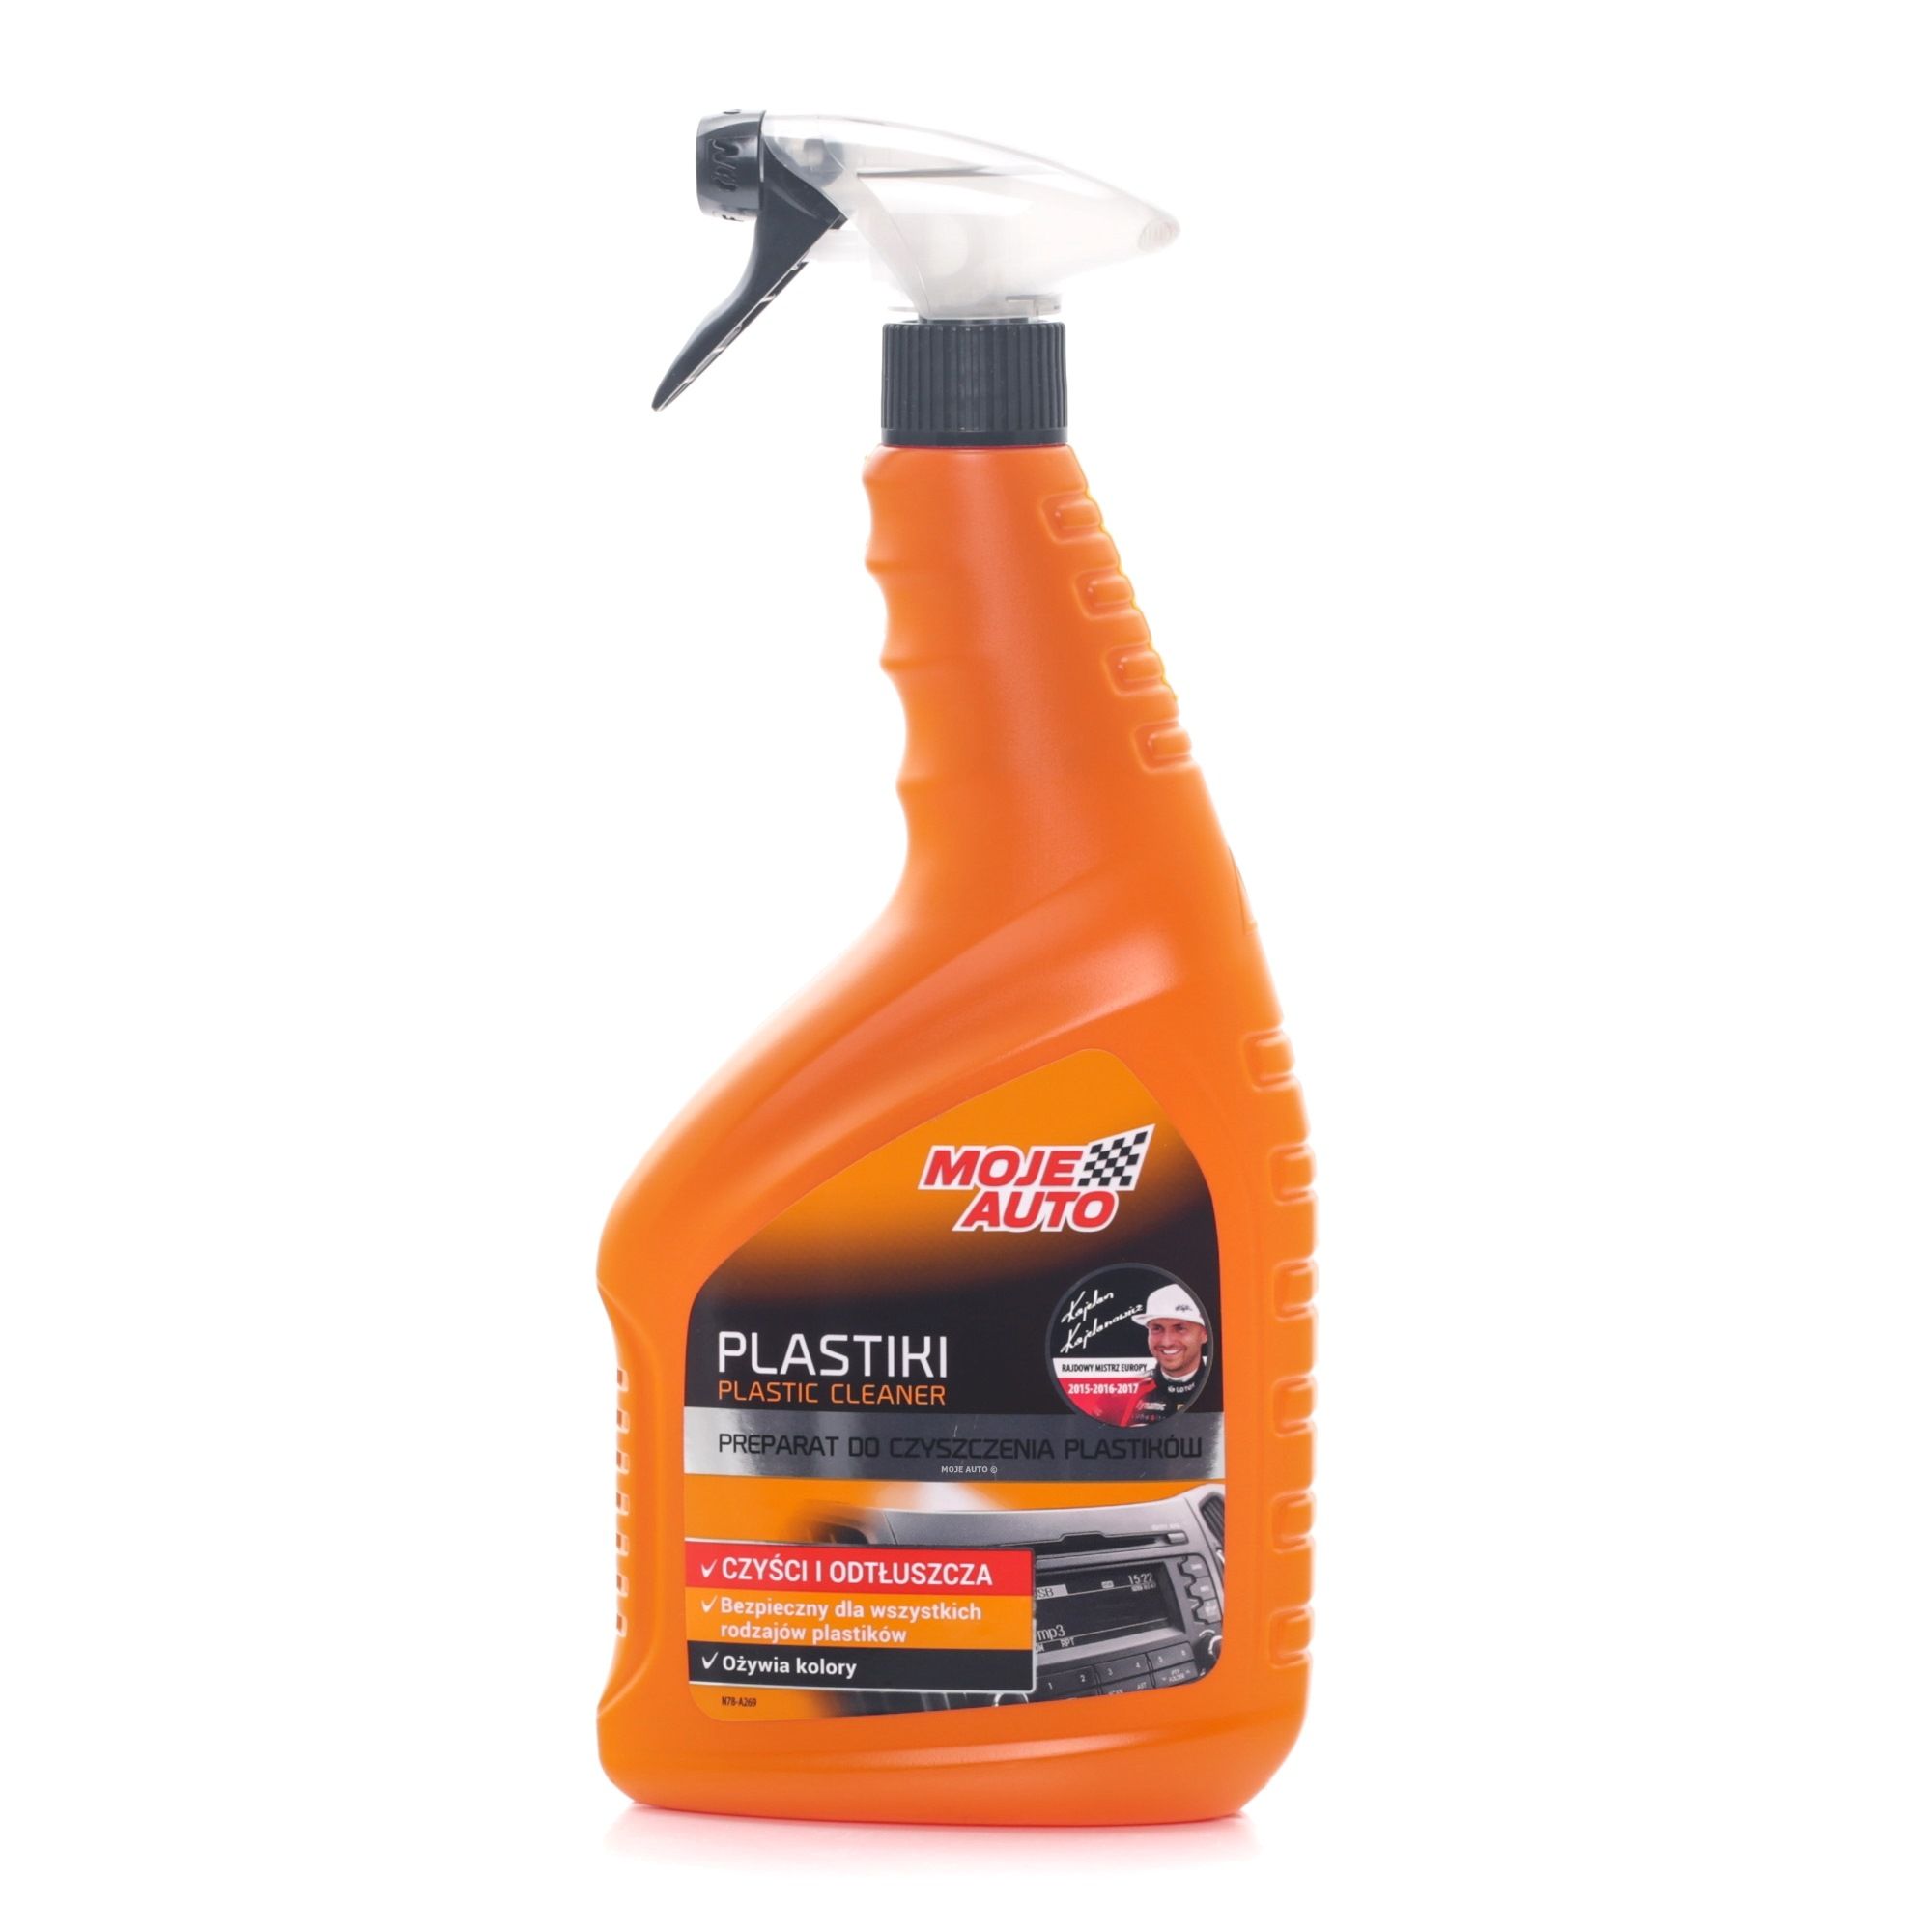 MOJE AUTO 19072 Synthetic Material Care Products Glossy, Capacity: 650ml, aerosol